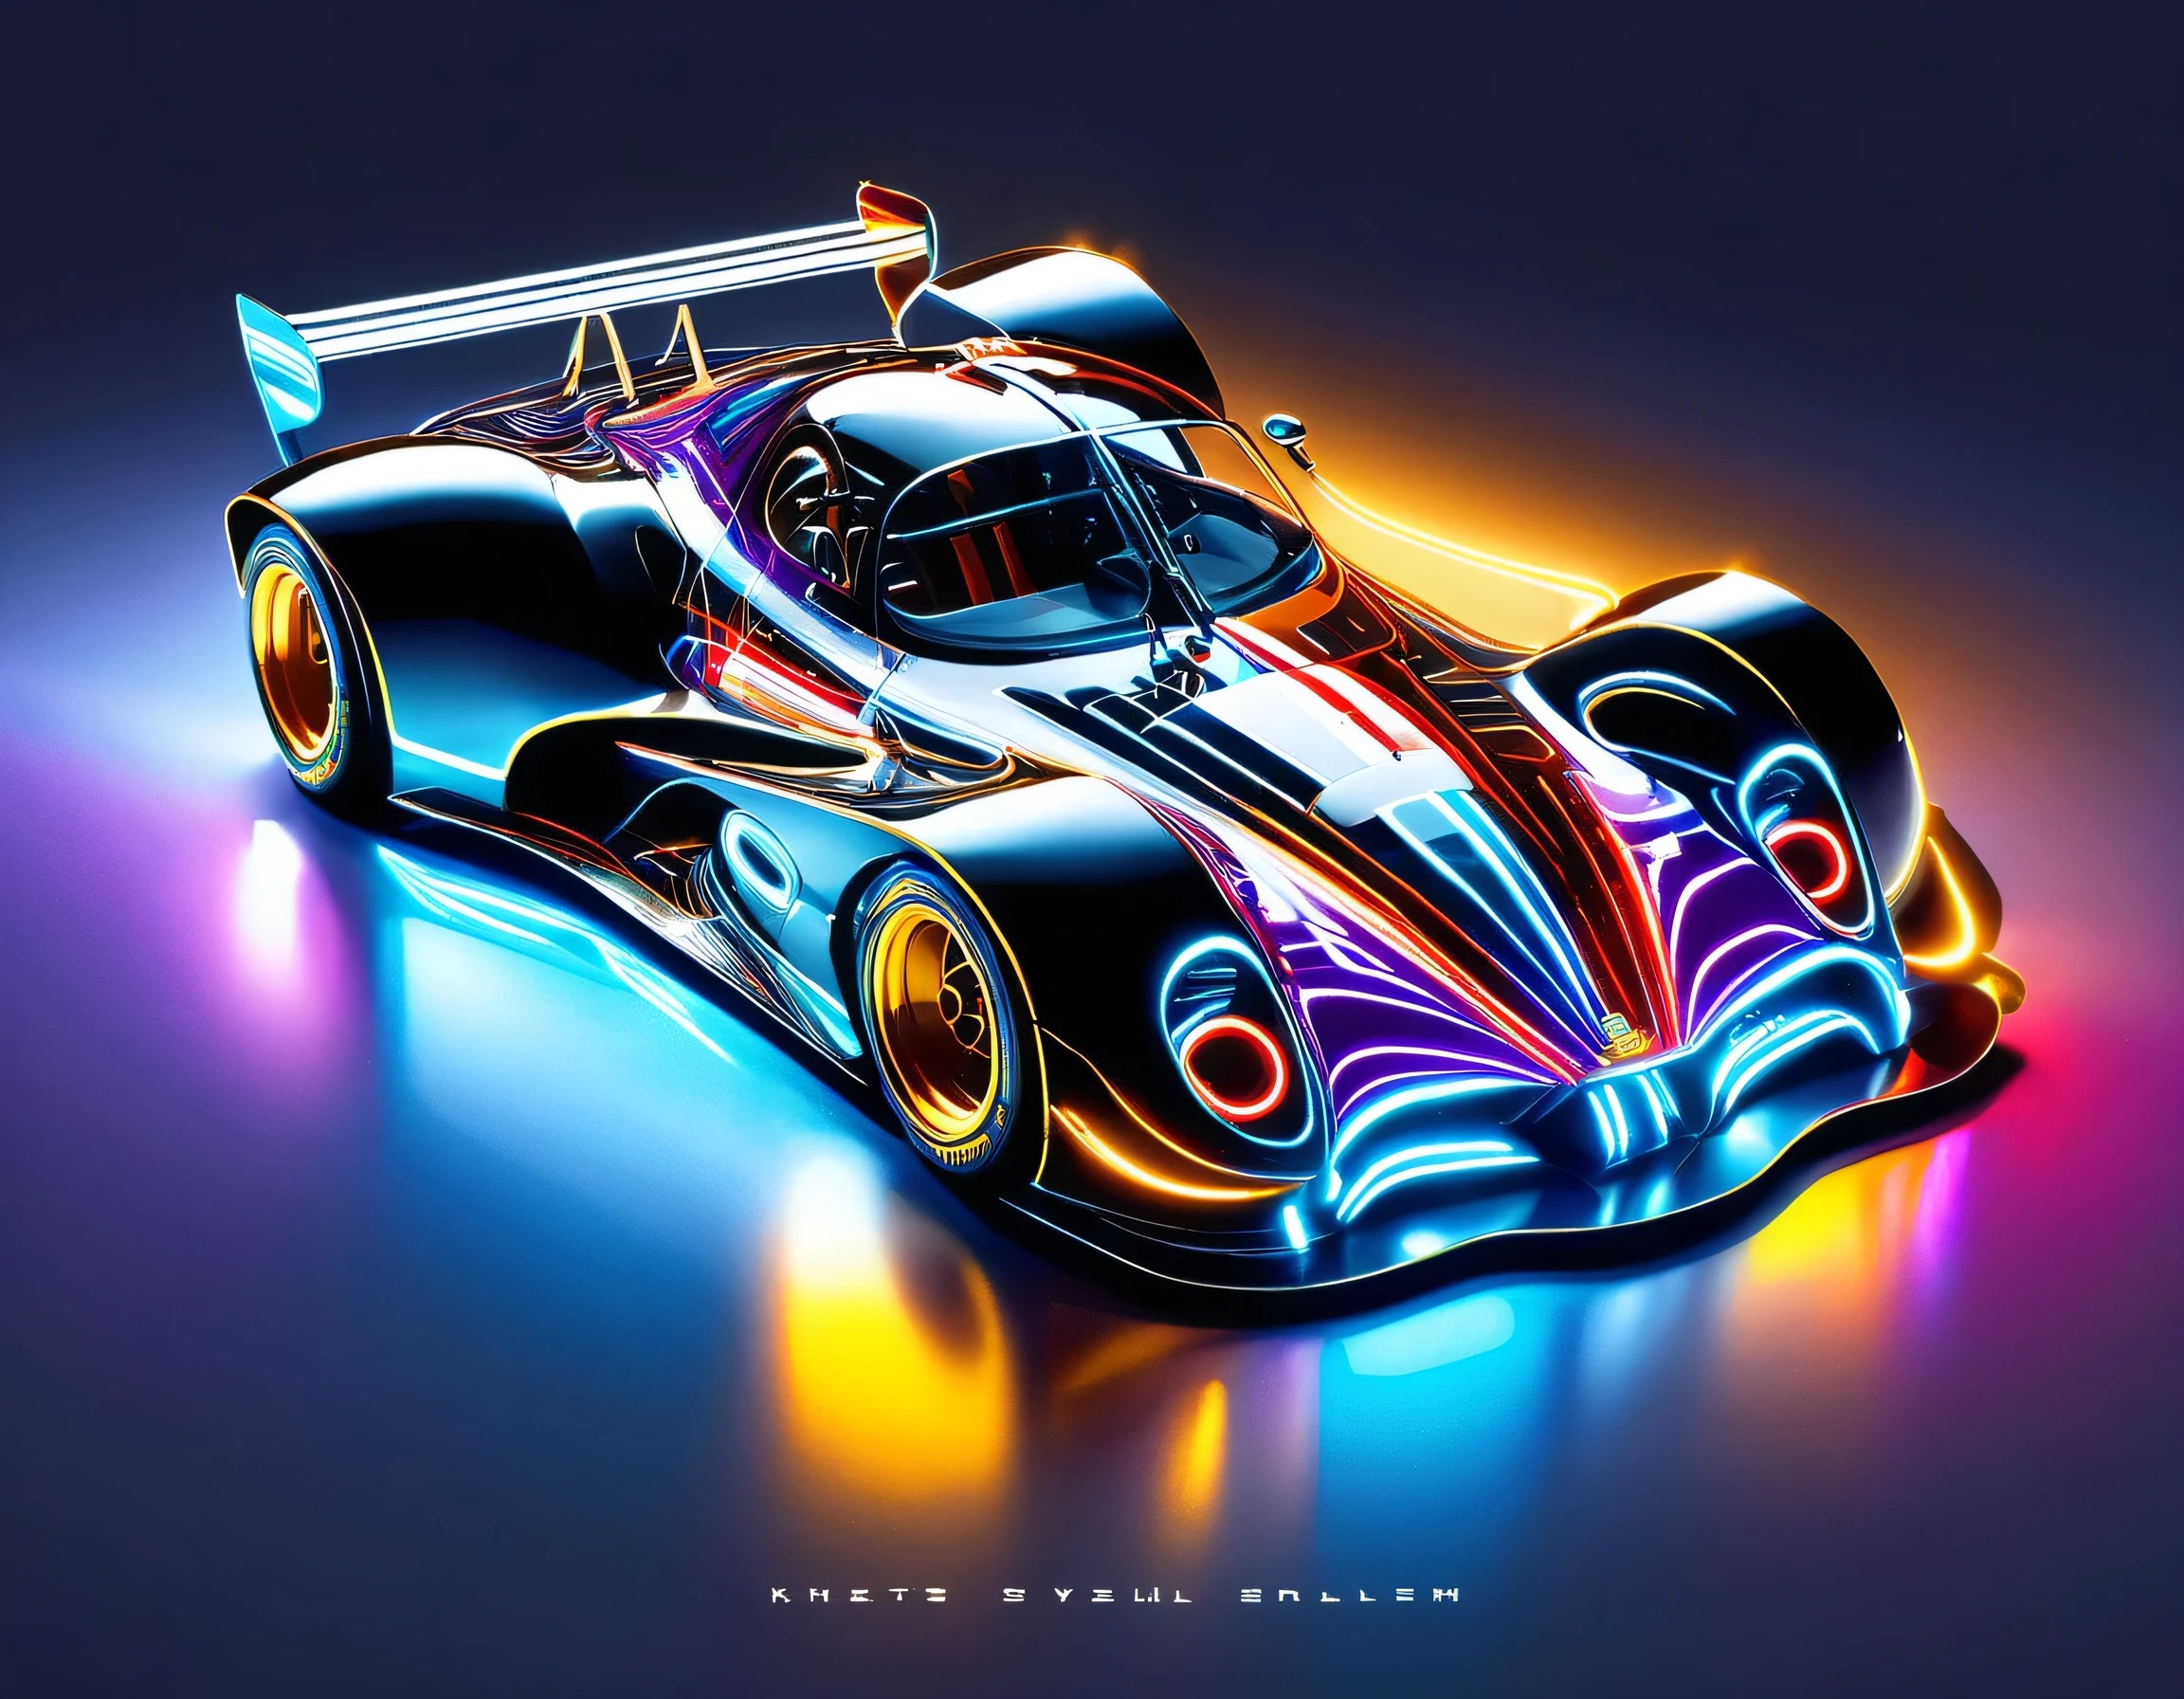 Capture the thrilling moments of a sophisticated racing car racing through a vibrant circuit field. Each line and curve of the car&#39;s aerodynamic body is、フォトリアルなディテールで細心の注意を払ってrenderingされています。. The circuit field casts lively and long with rich contrasting colors., dynamic shadows on the track. If you pay attention to the shiny metallic car body,, Metallic light reflects coldly, Creates an exhilarating sense of speed. The realistic masterpiece of the wind blowing through the circuit field is a top-notch masterpiece that is a must-see for race fans.,rich colors,rendering,colorfulな呪文を唱える,beautiful halation effect,racing car,structurally correct,colorful,nice,Highest,masterpiece,Highest品質,hologram,neon lines,powerful,Highestの構図